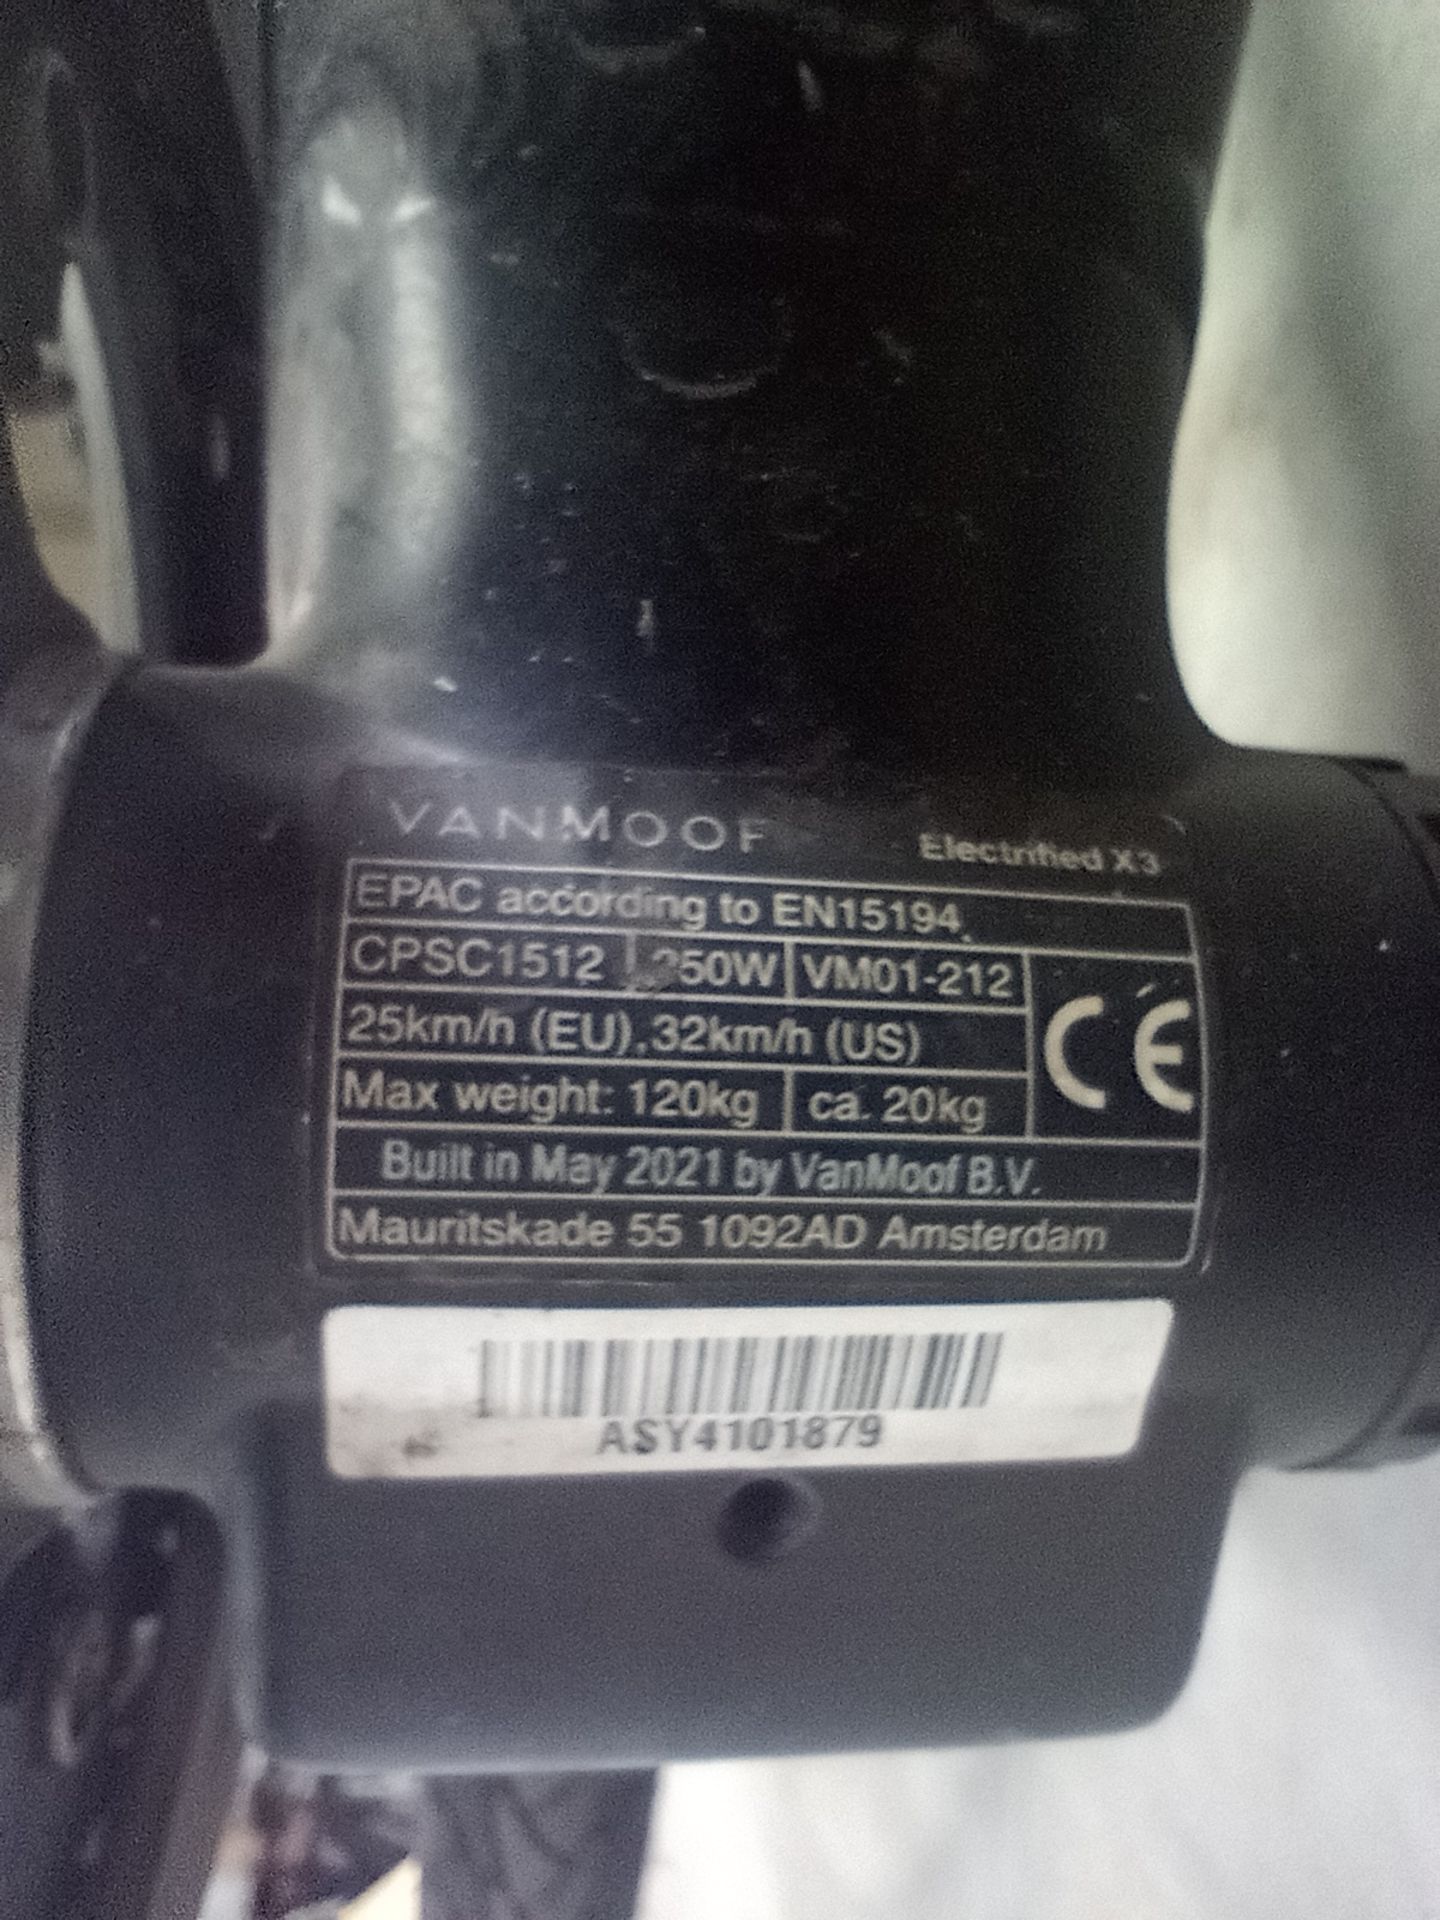 VanMoof X3 Electric Bike, Serial Number ASY4101879 (NOT ROADWORTHY - FOR SPARES ONLY) (No codes - Image 3 of 3